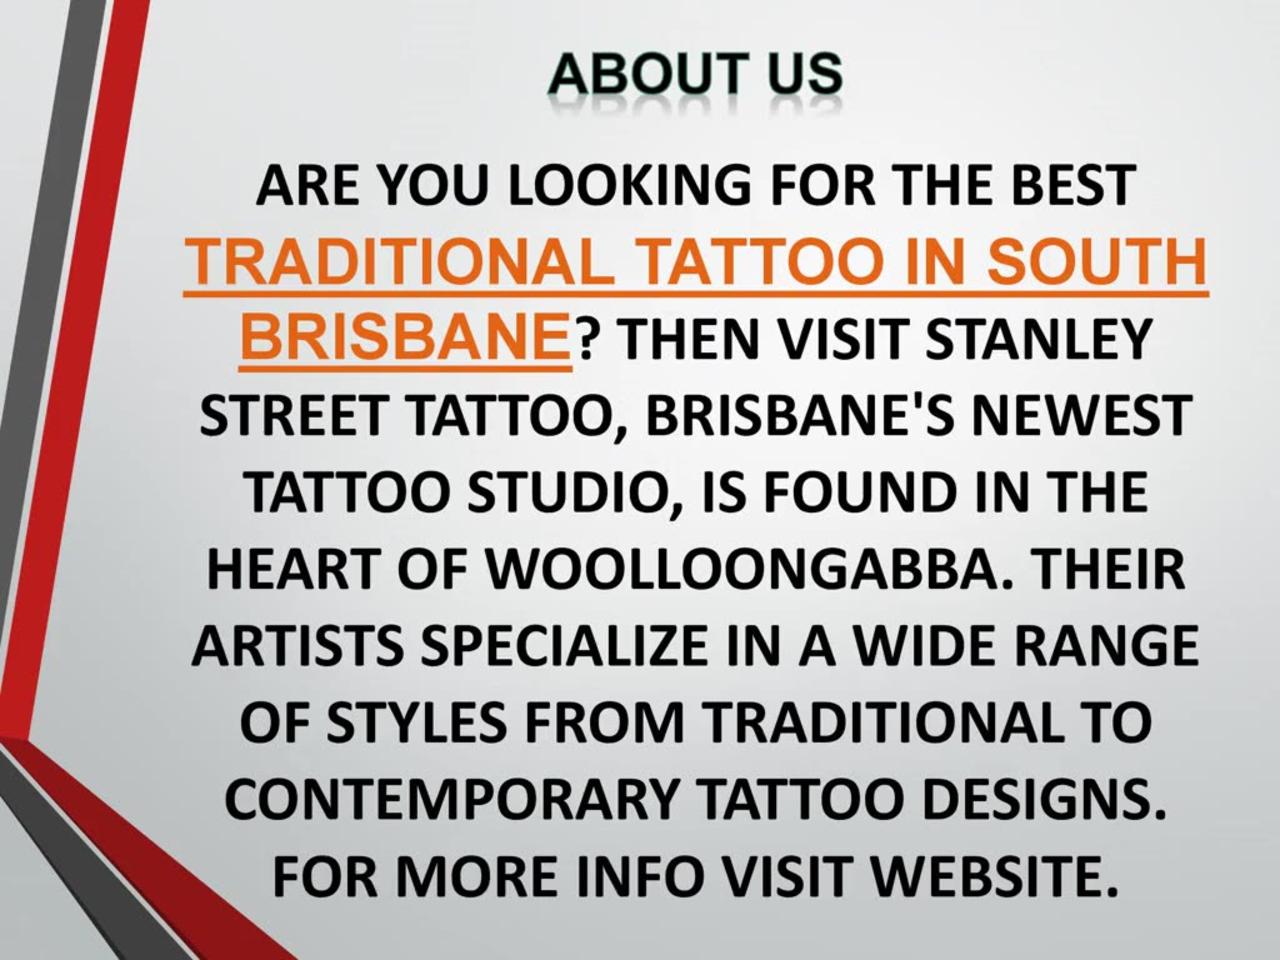 Best Traditional Tattoo in South Brisbane